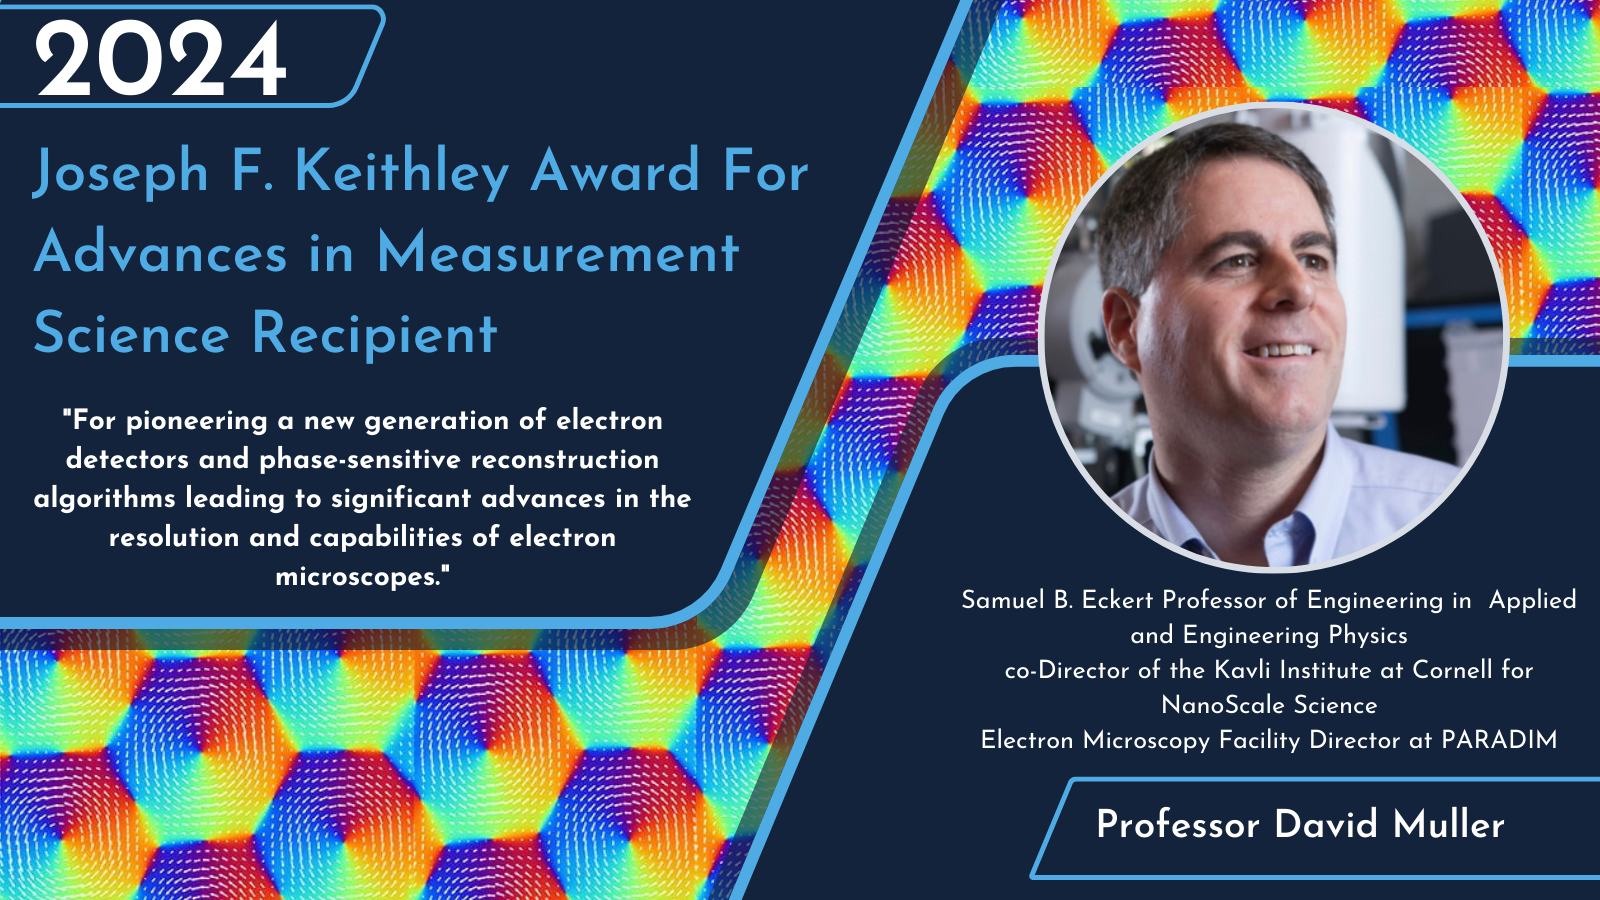  2024 Joseph F. Keithley Award For Advances in Measurement Science Recipient  Recipient Picture David A Muller Cornell University Citation:  "For pioneering a new generation of electron detectors and phase-sensitive reconstruction algorithms leading to significant advances in the resolution and capabilities of electron microscopes."